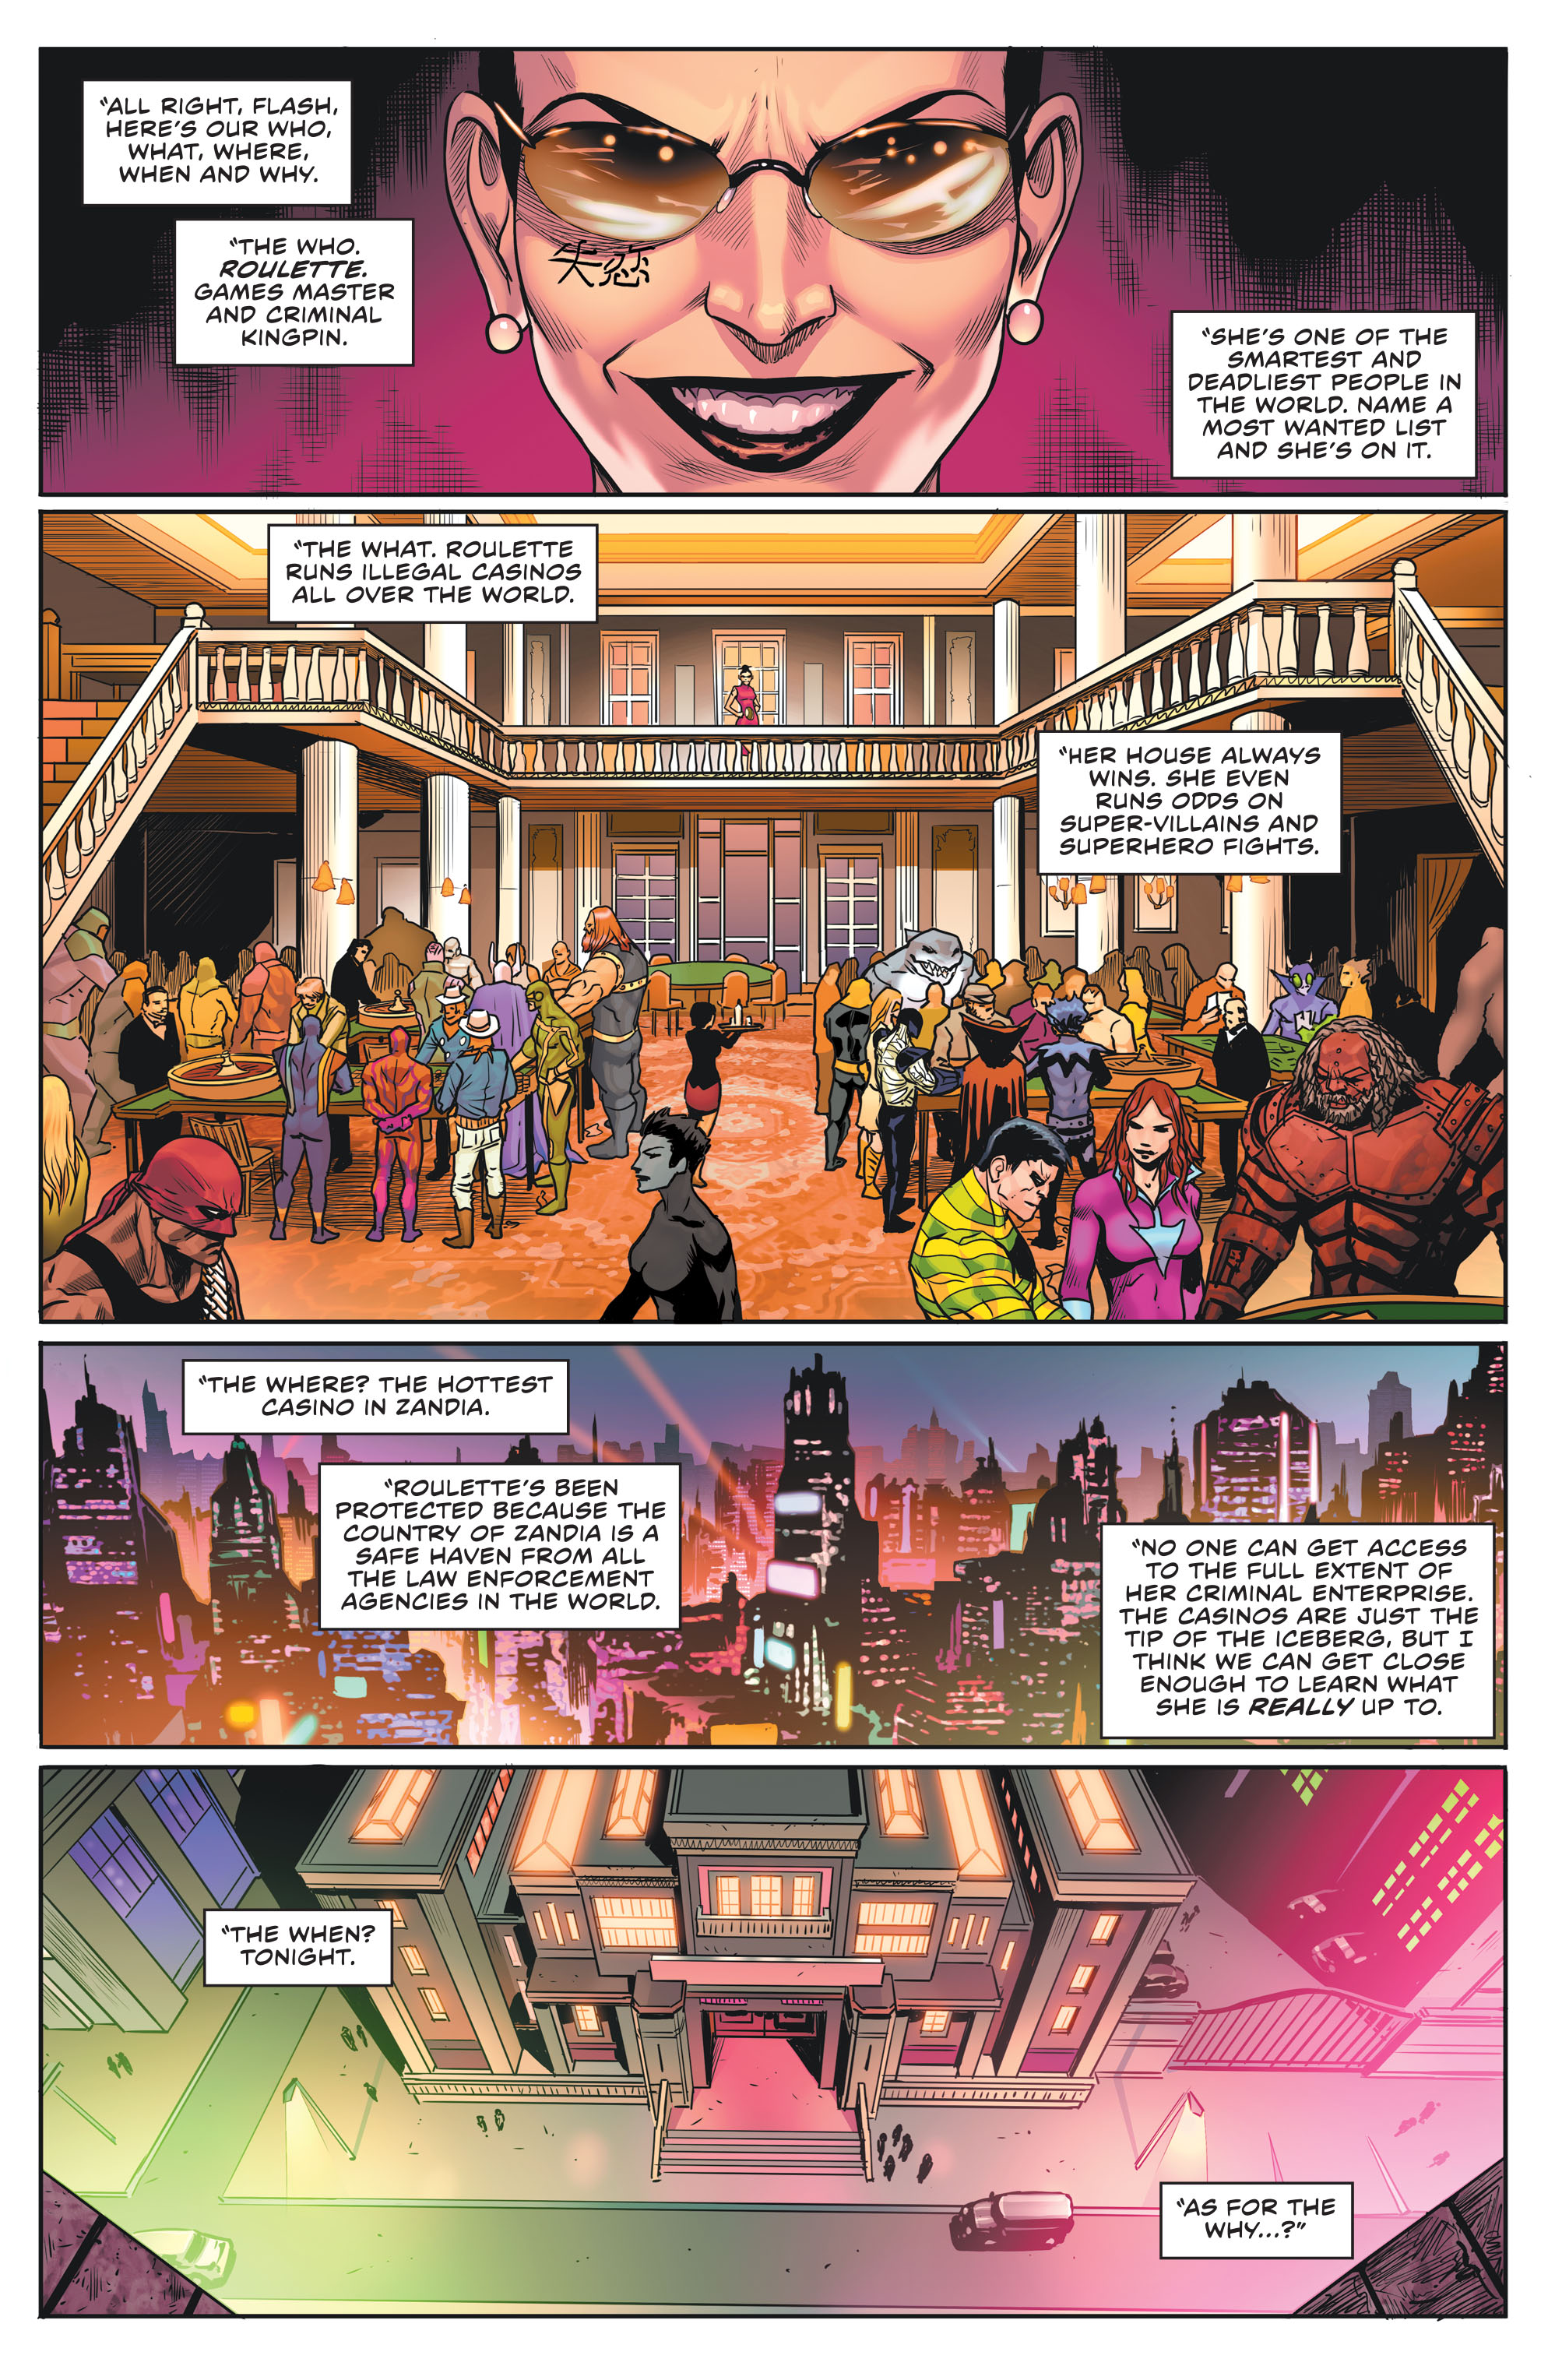 The Flash (2016-): Chapter 62 - Page 4